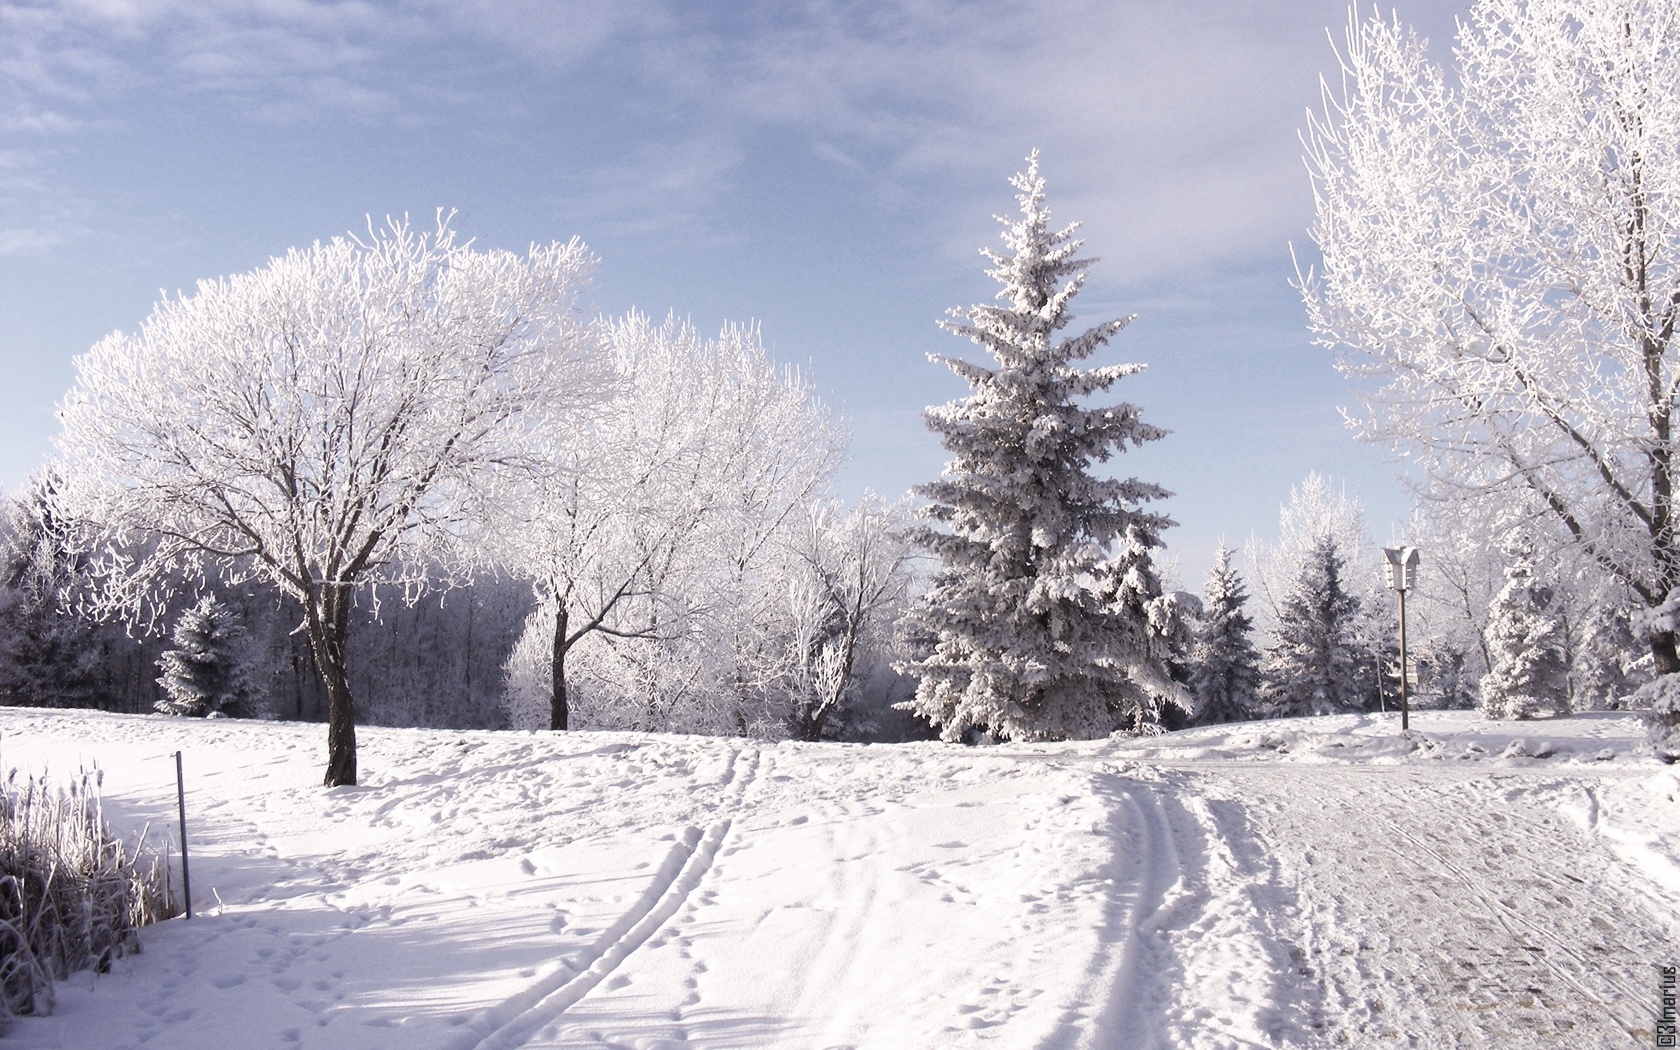 Winter HD Wallpapers Pictures Images Backgrounds Photos